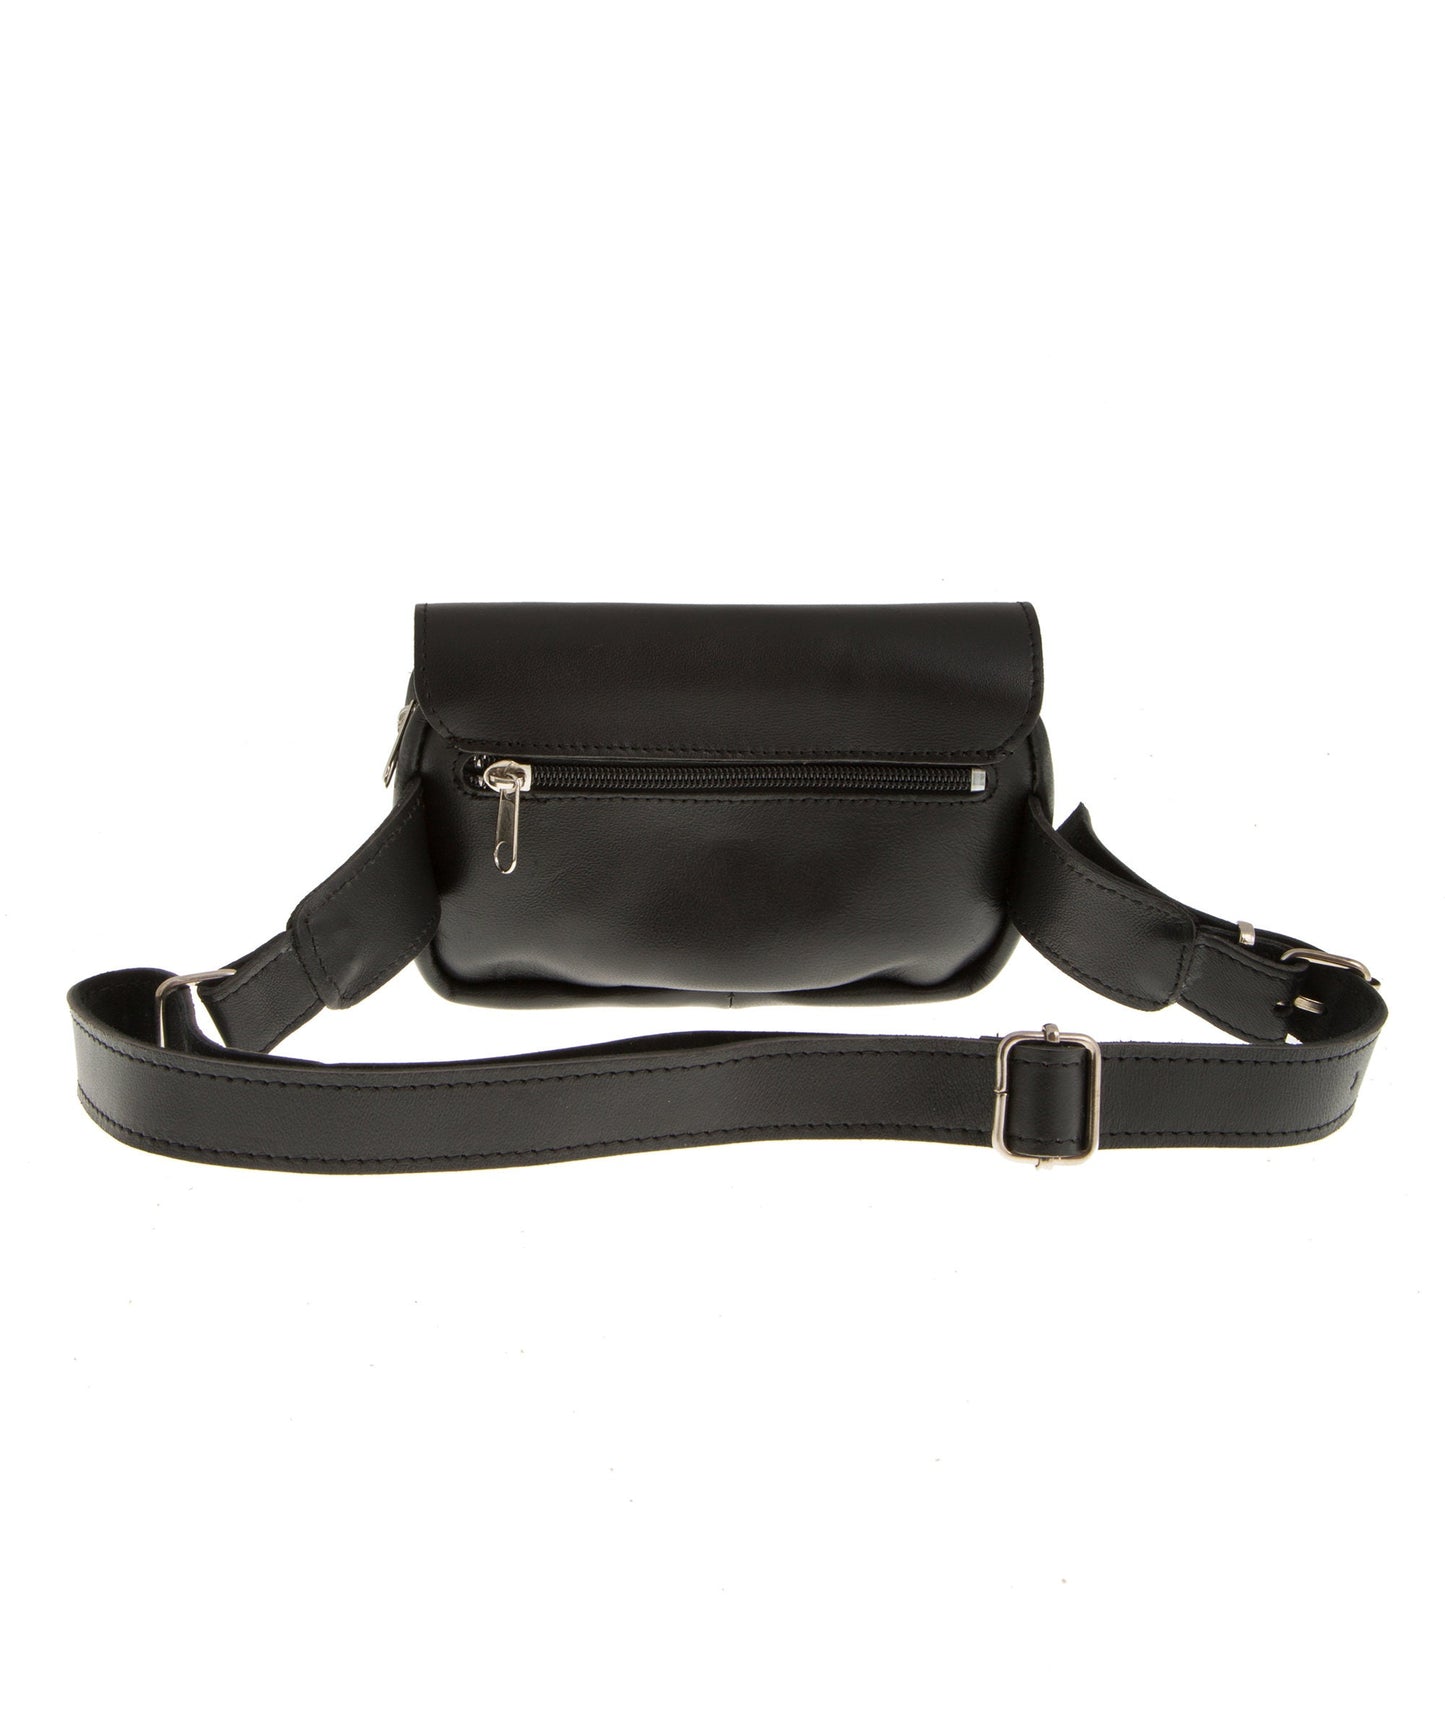 Leather Fanny Pack for Woman, Leather Belt Bags, Bum Bag, Hip Bag, Women's Leather Accessories